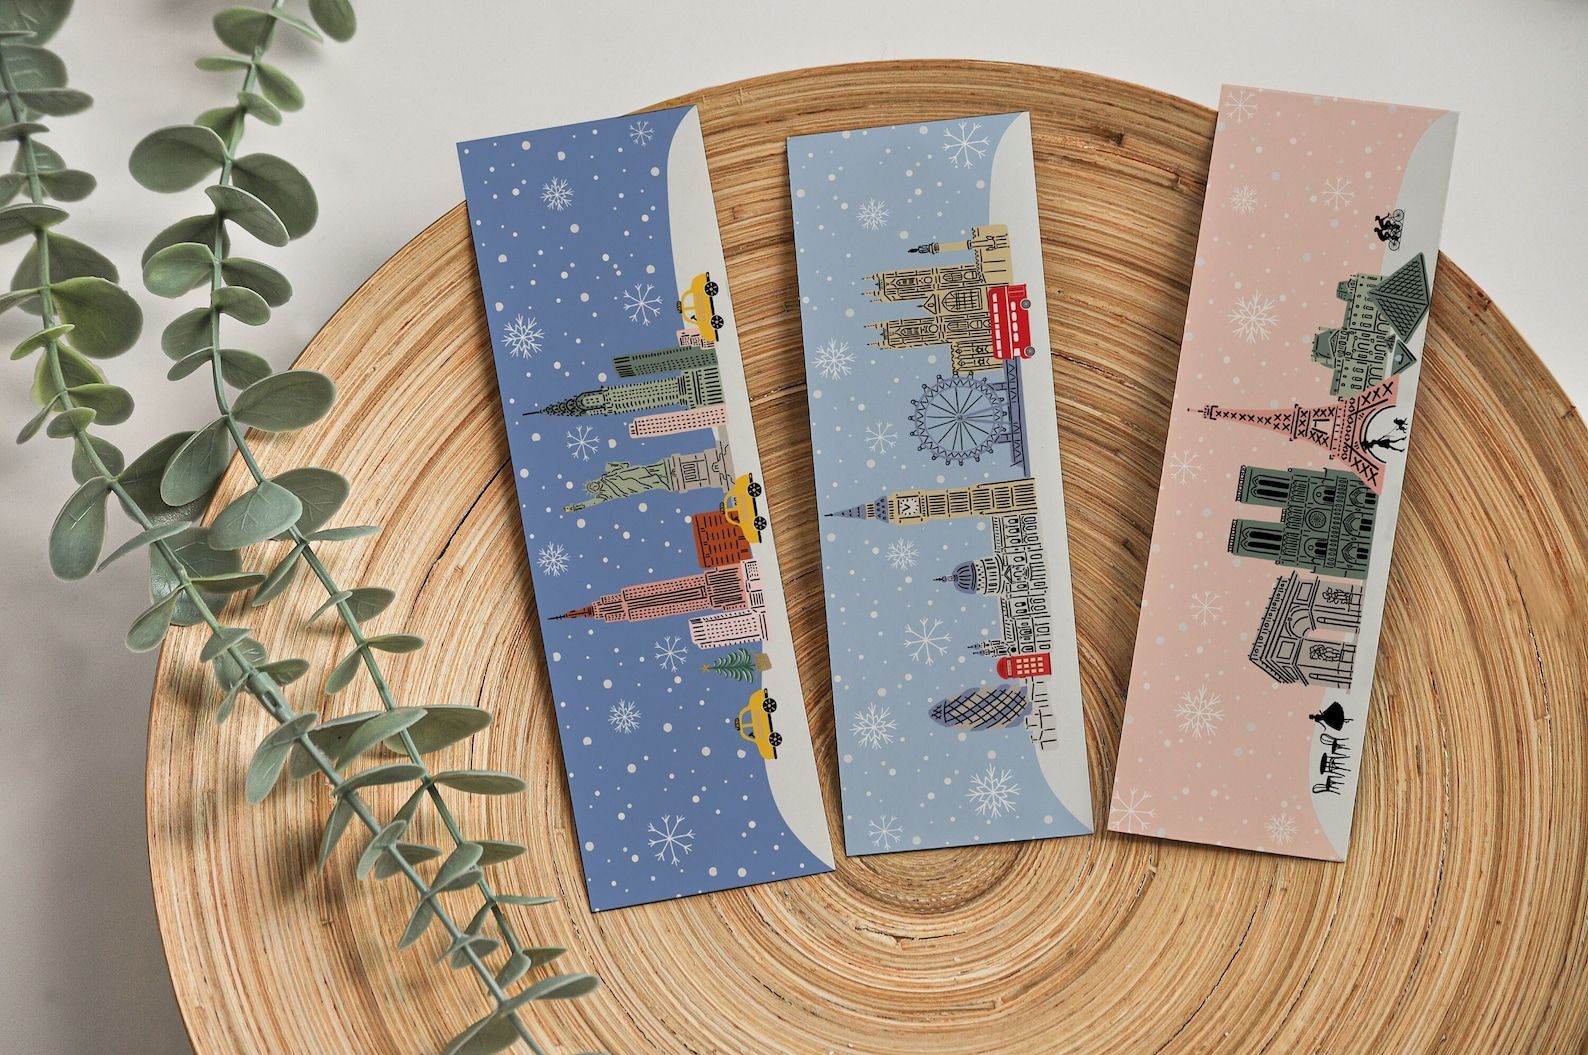 A set of three bookmarks featuring the skylines of NYC, London, and Paris in winter